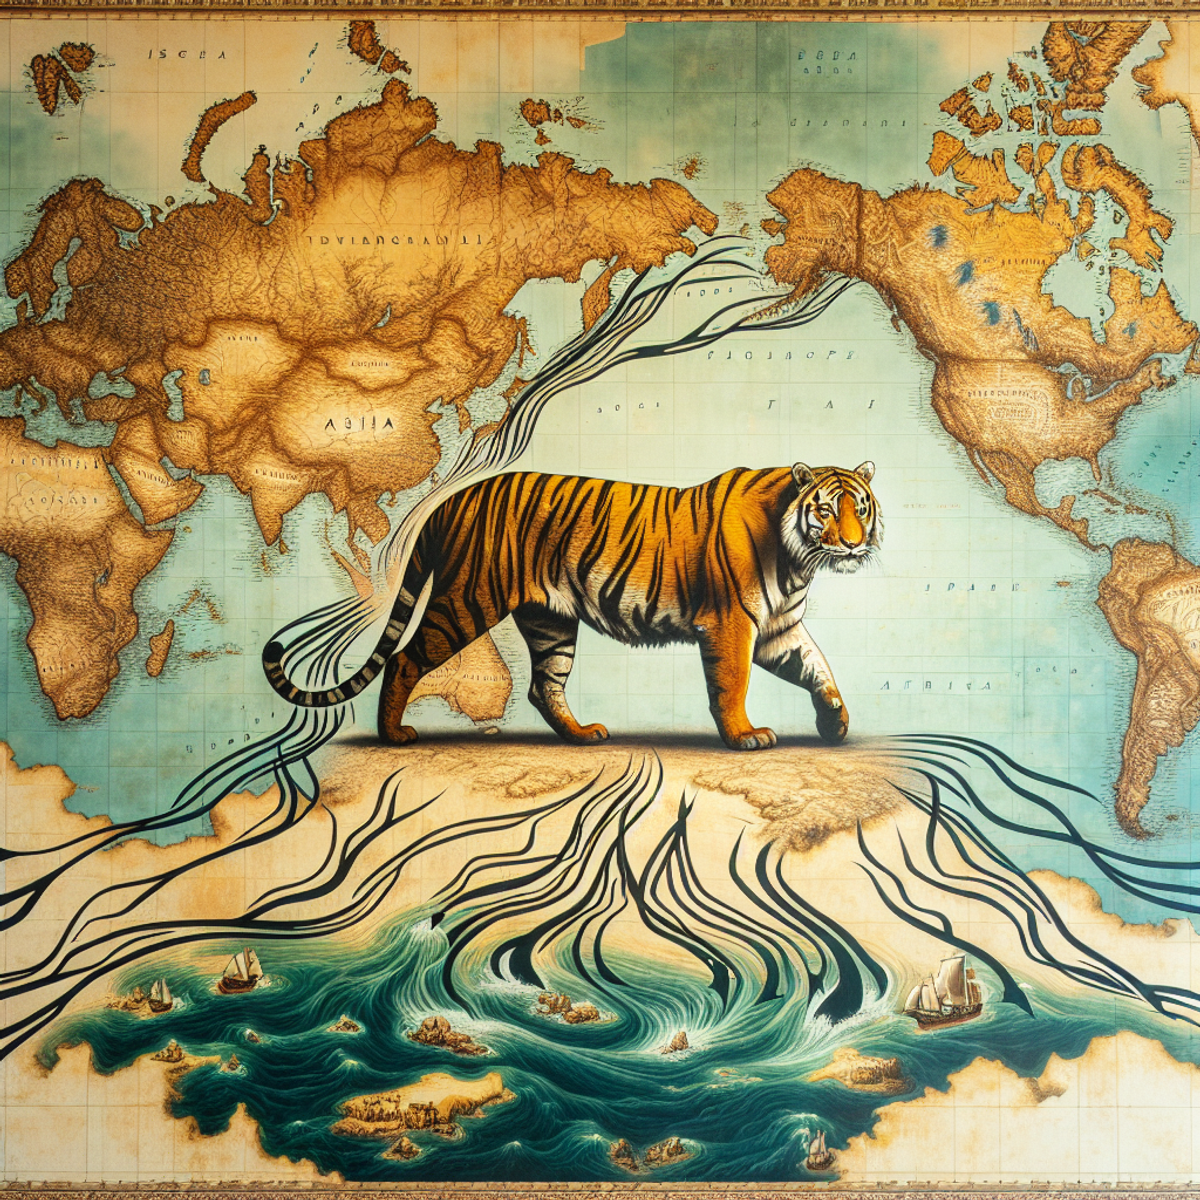 Majestic tiger standing on antique-style map with Asia and Africa continents.